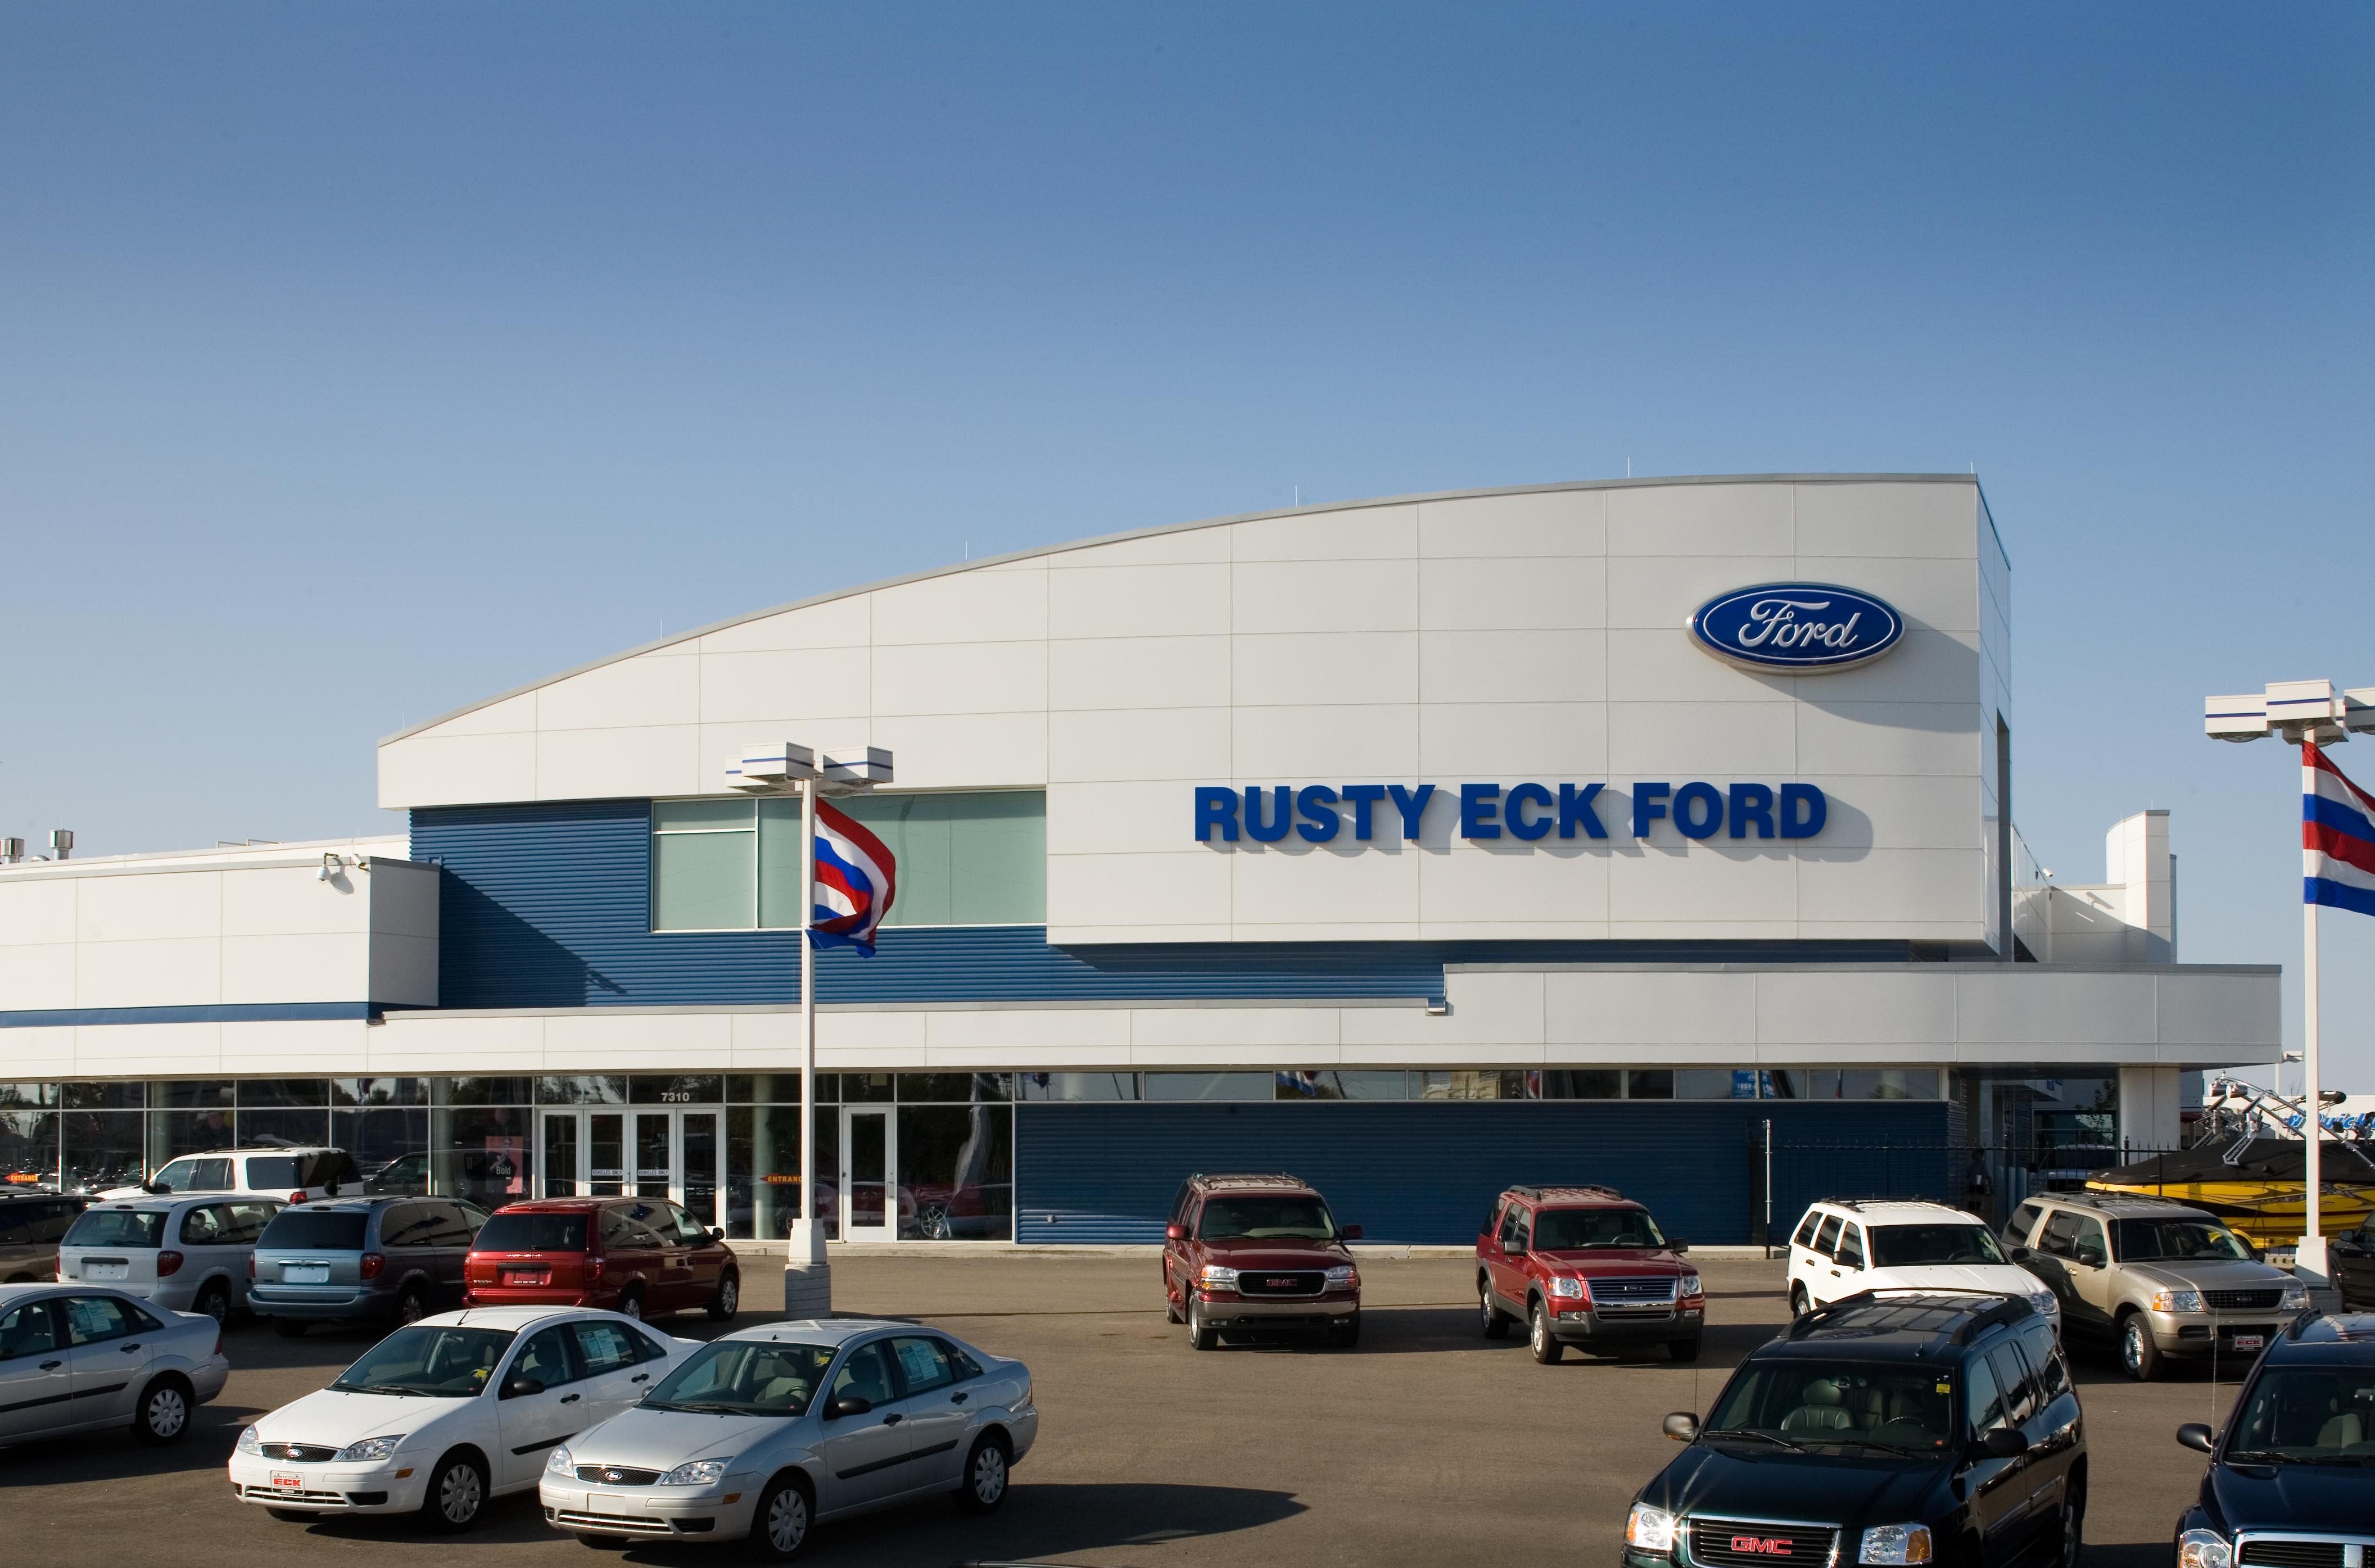 Rusty Eck Ford Building